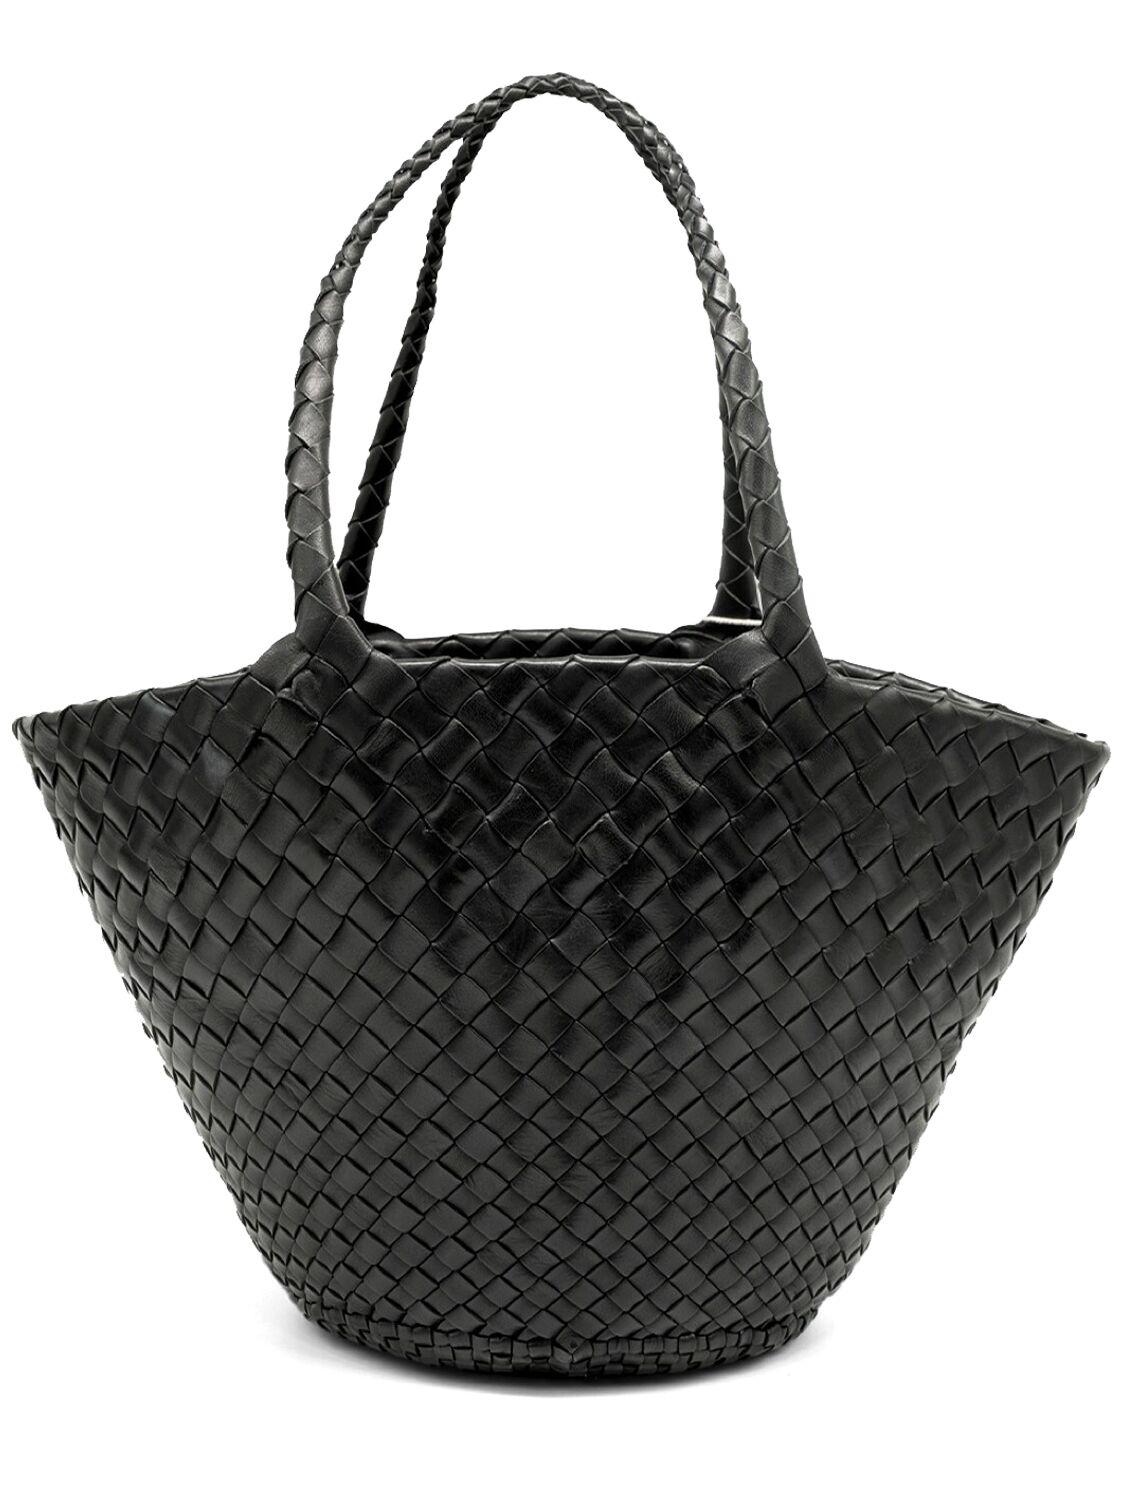 Dragon Diffusion Egola Hand-braided Leather Tote Bag In Black